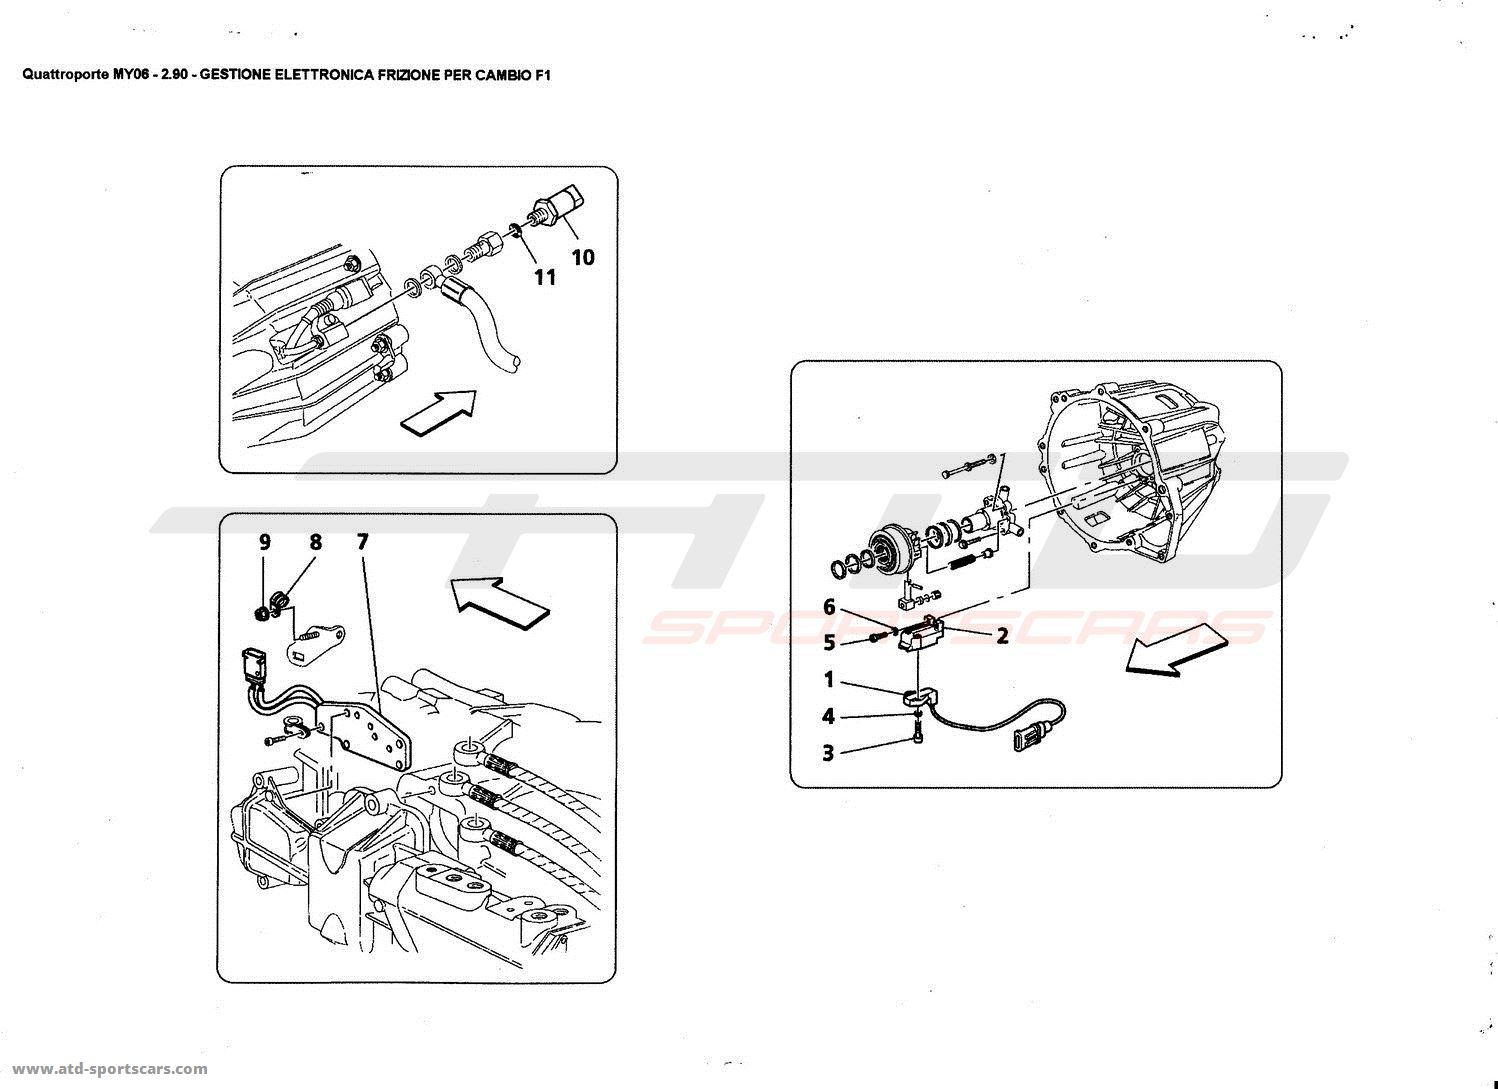 CLUTCH ELECTRONIC CONTROLS FOR F1 GEARBOX